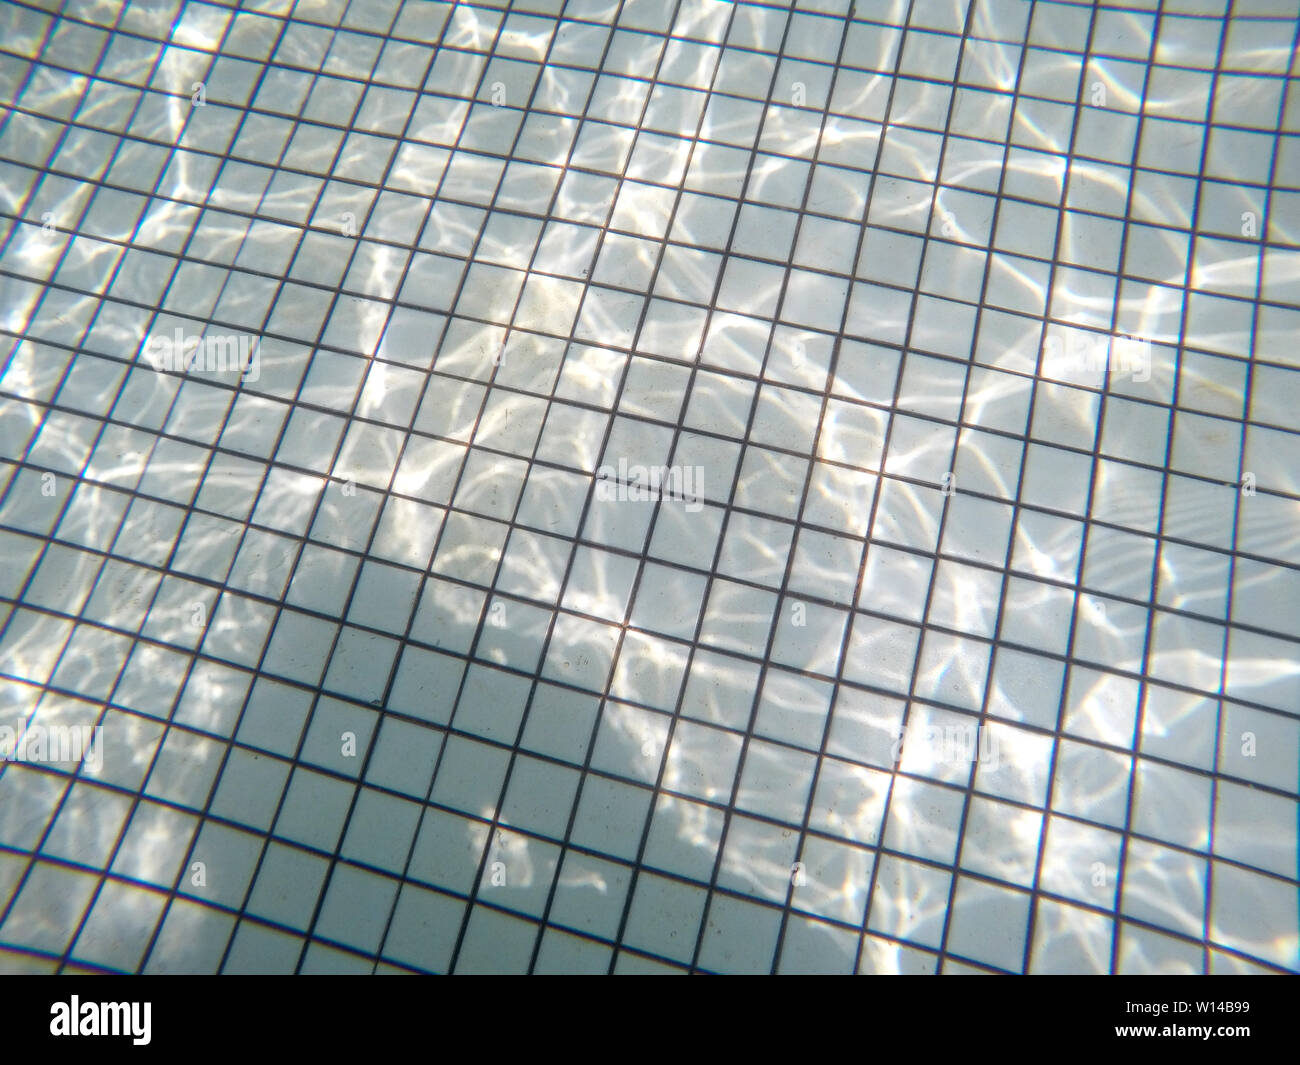 underwater view of swimming pool floor with sunlight reflections. concept of leisure activities Stock Photo